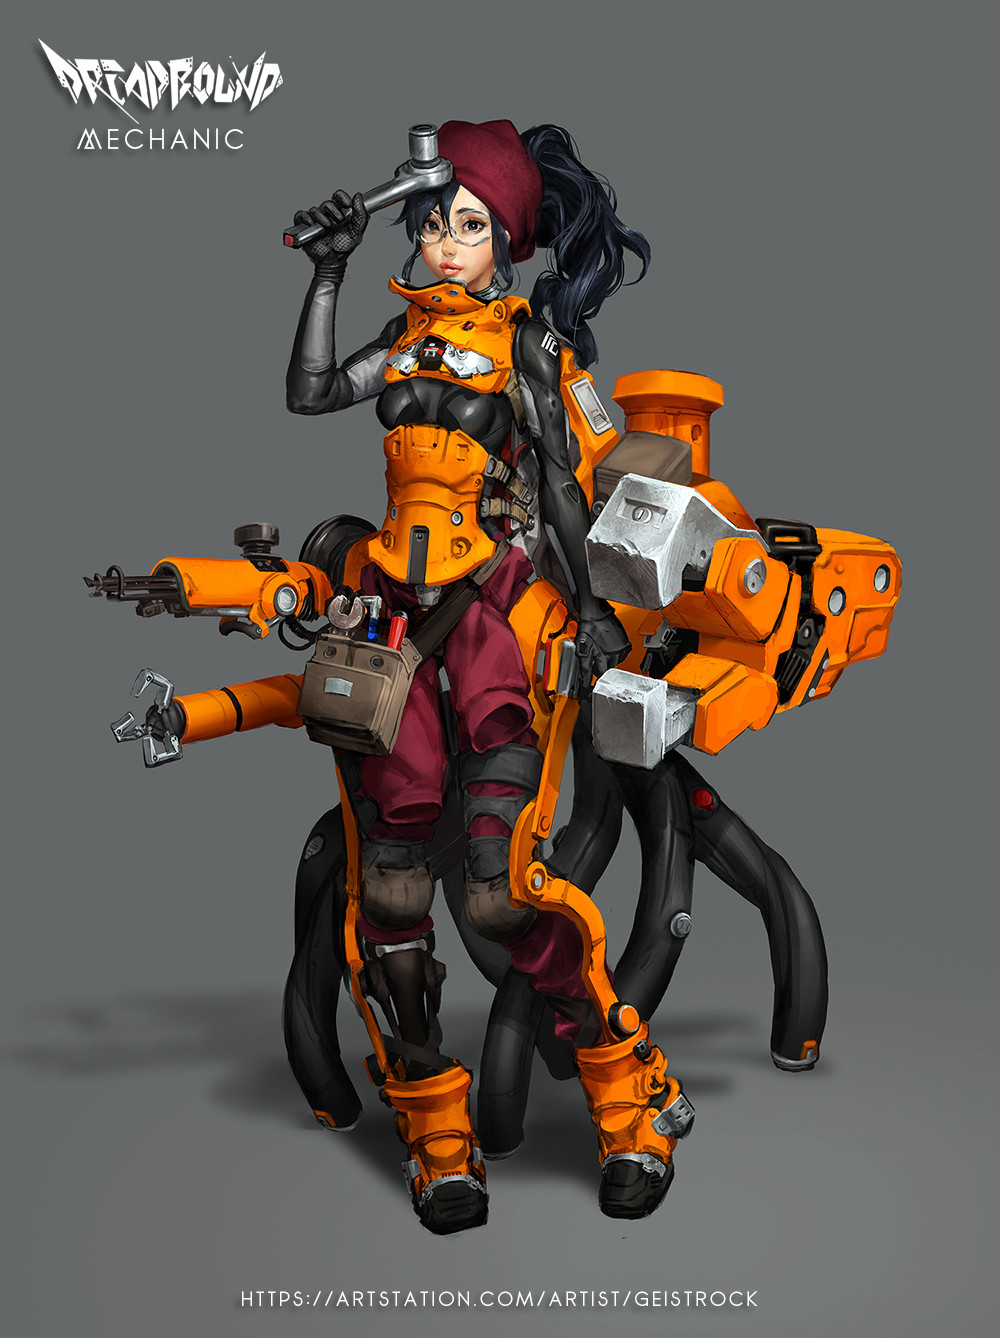 Conceptual render of Mechanic character for Dreadbound board game.